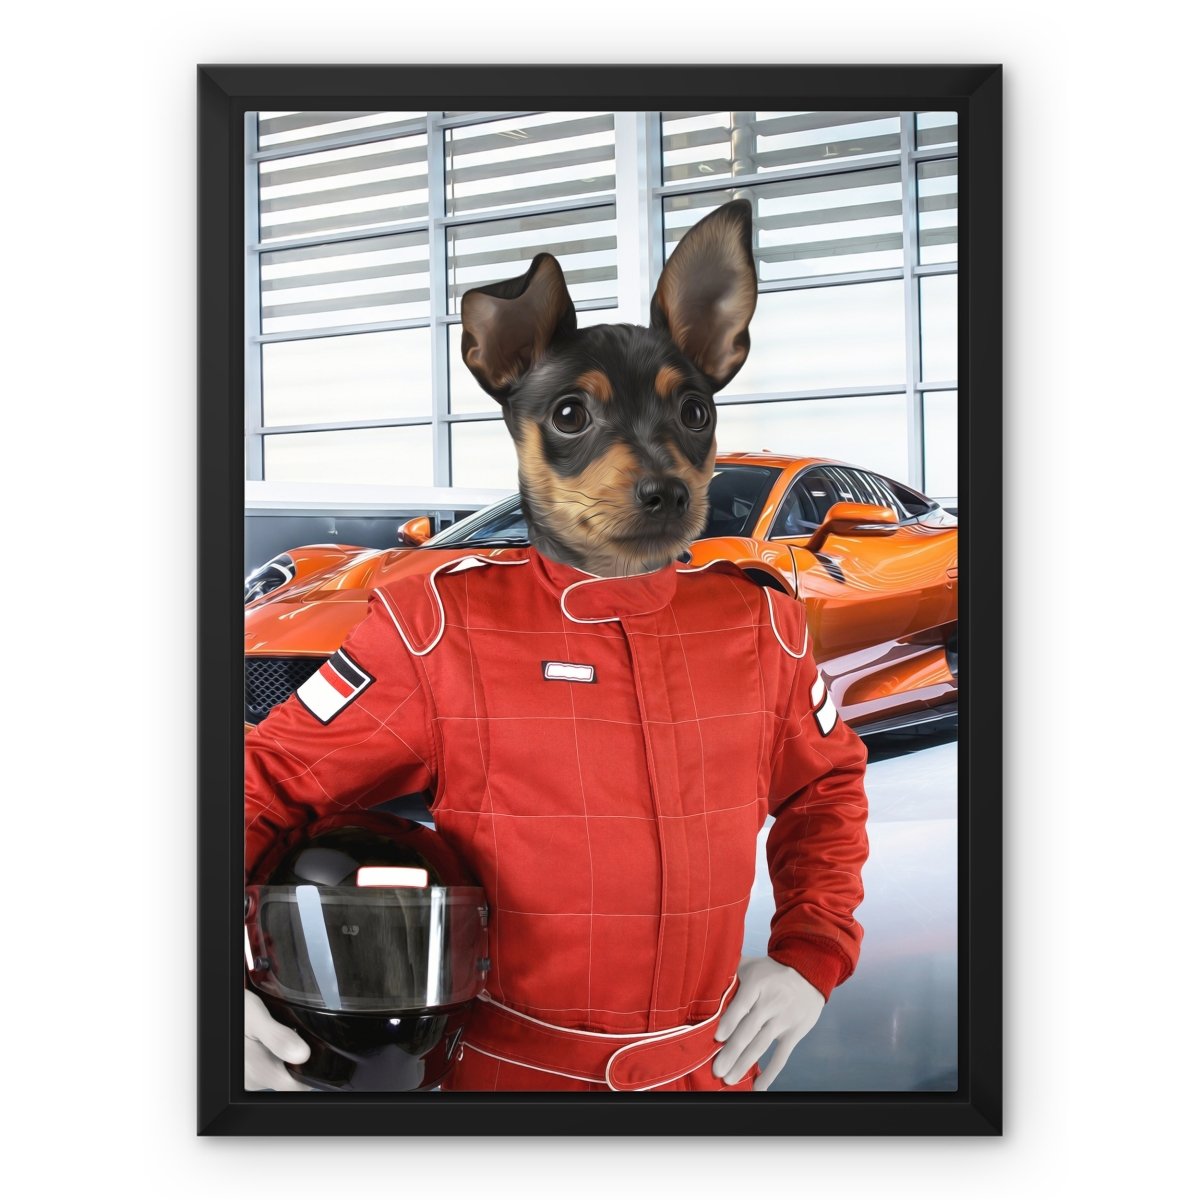 The Nascar Racer: Custom Pet Canvas - Paw & Glory - #pet portraits# - #dog portraits# - #pet portraits uk#paw & glory, custom pet portrait canvas,my pet canvas, pet on canvas reviews, personalized dog and owner canvas uk, pet canvas uk, pet canvas portrait, the pet on canvas